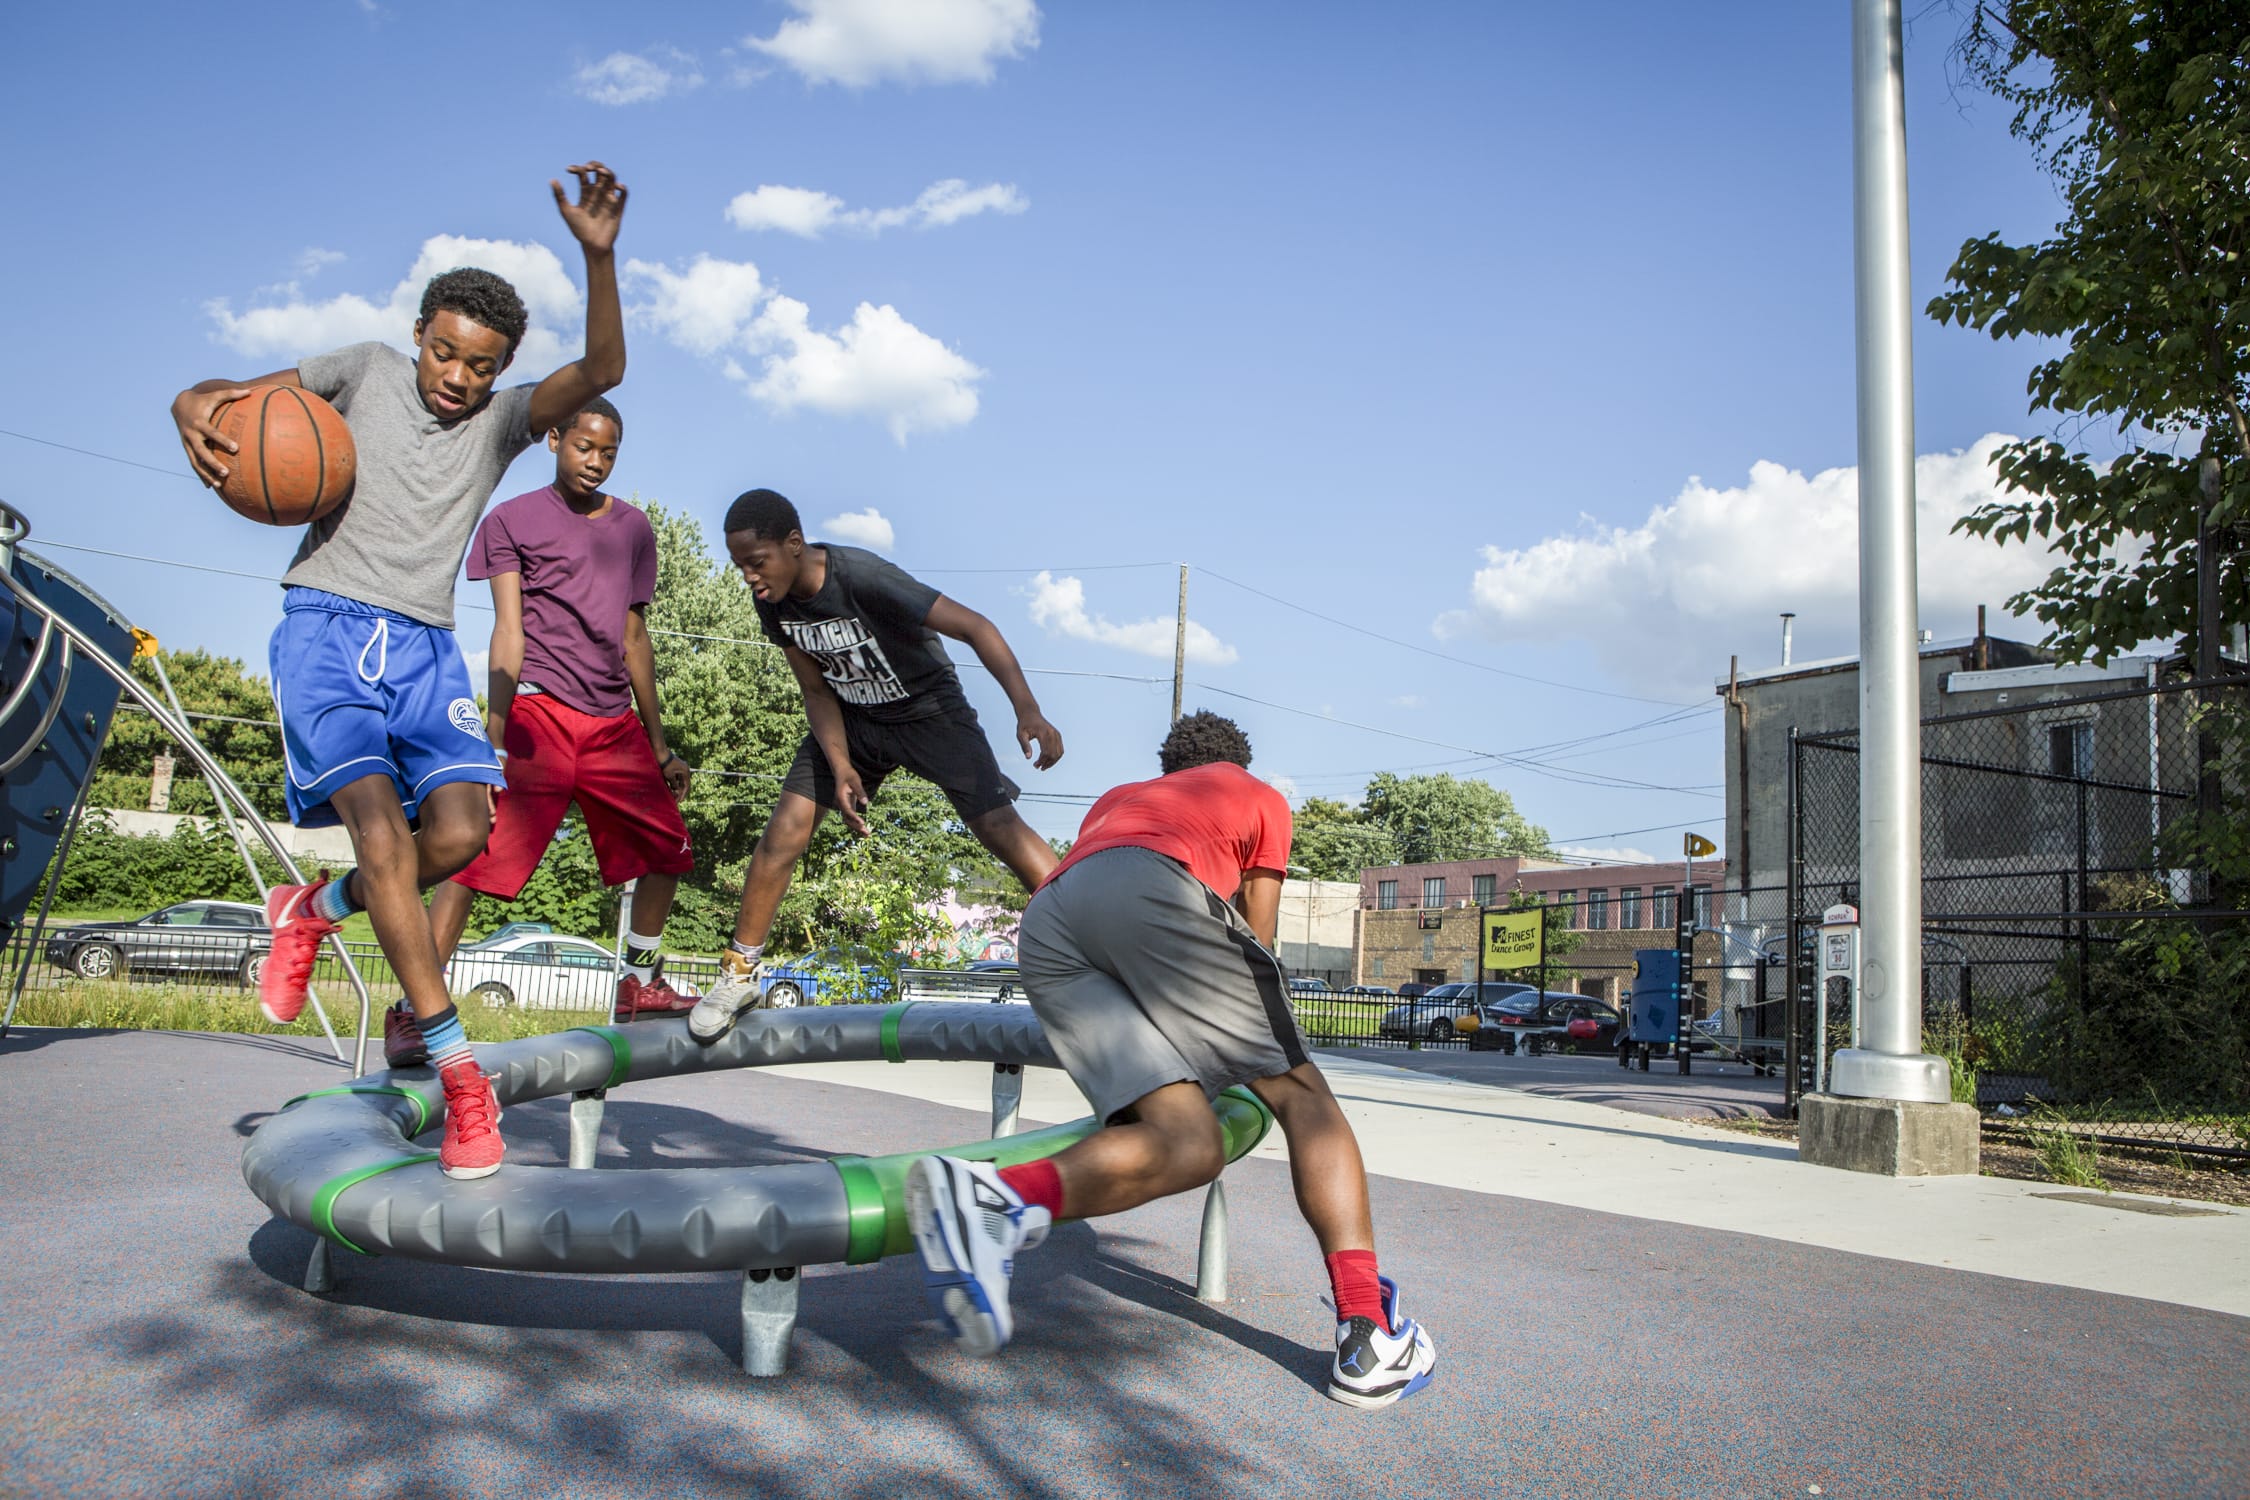 A group of young men playing basketball on a trampoline.